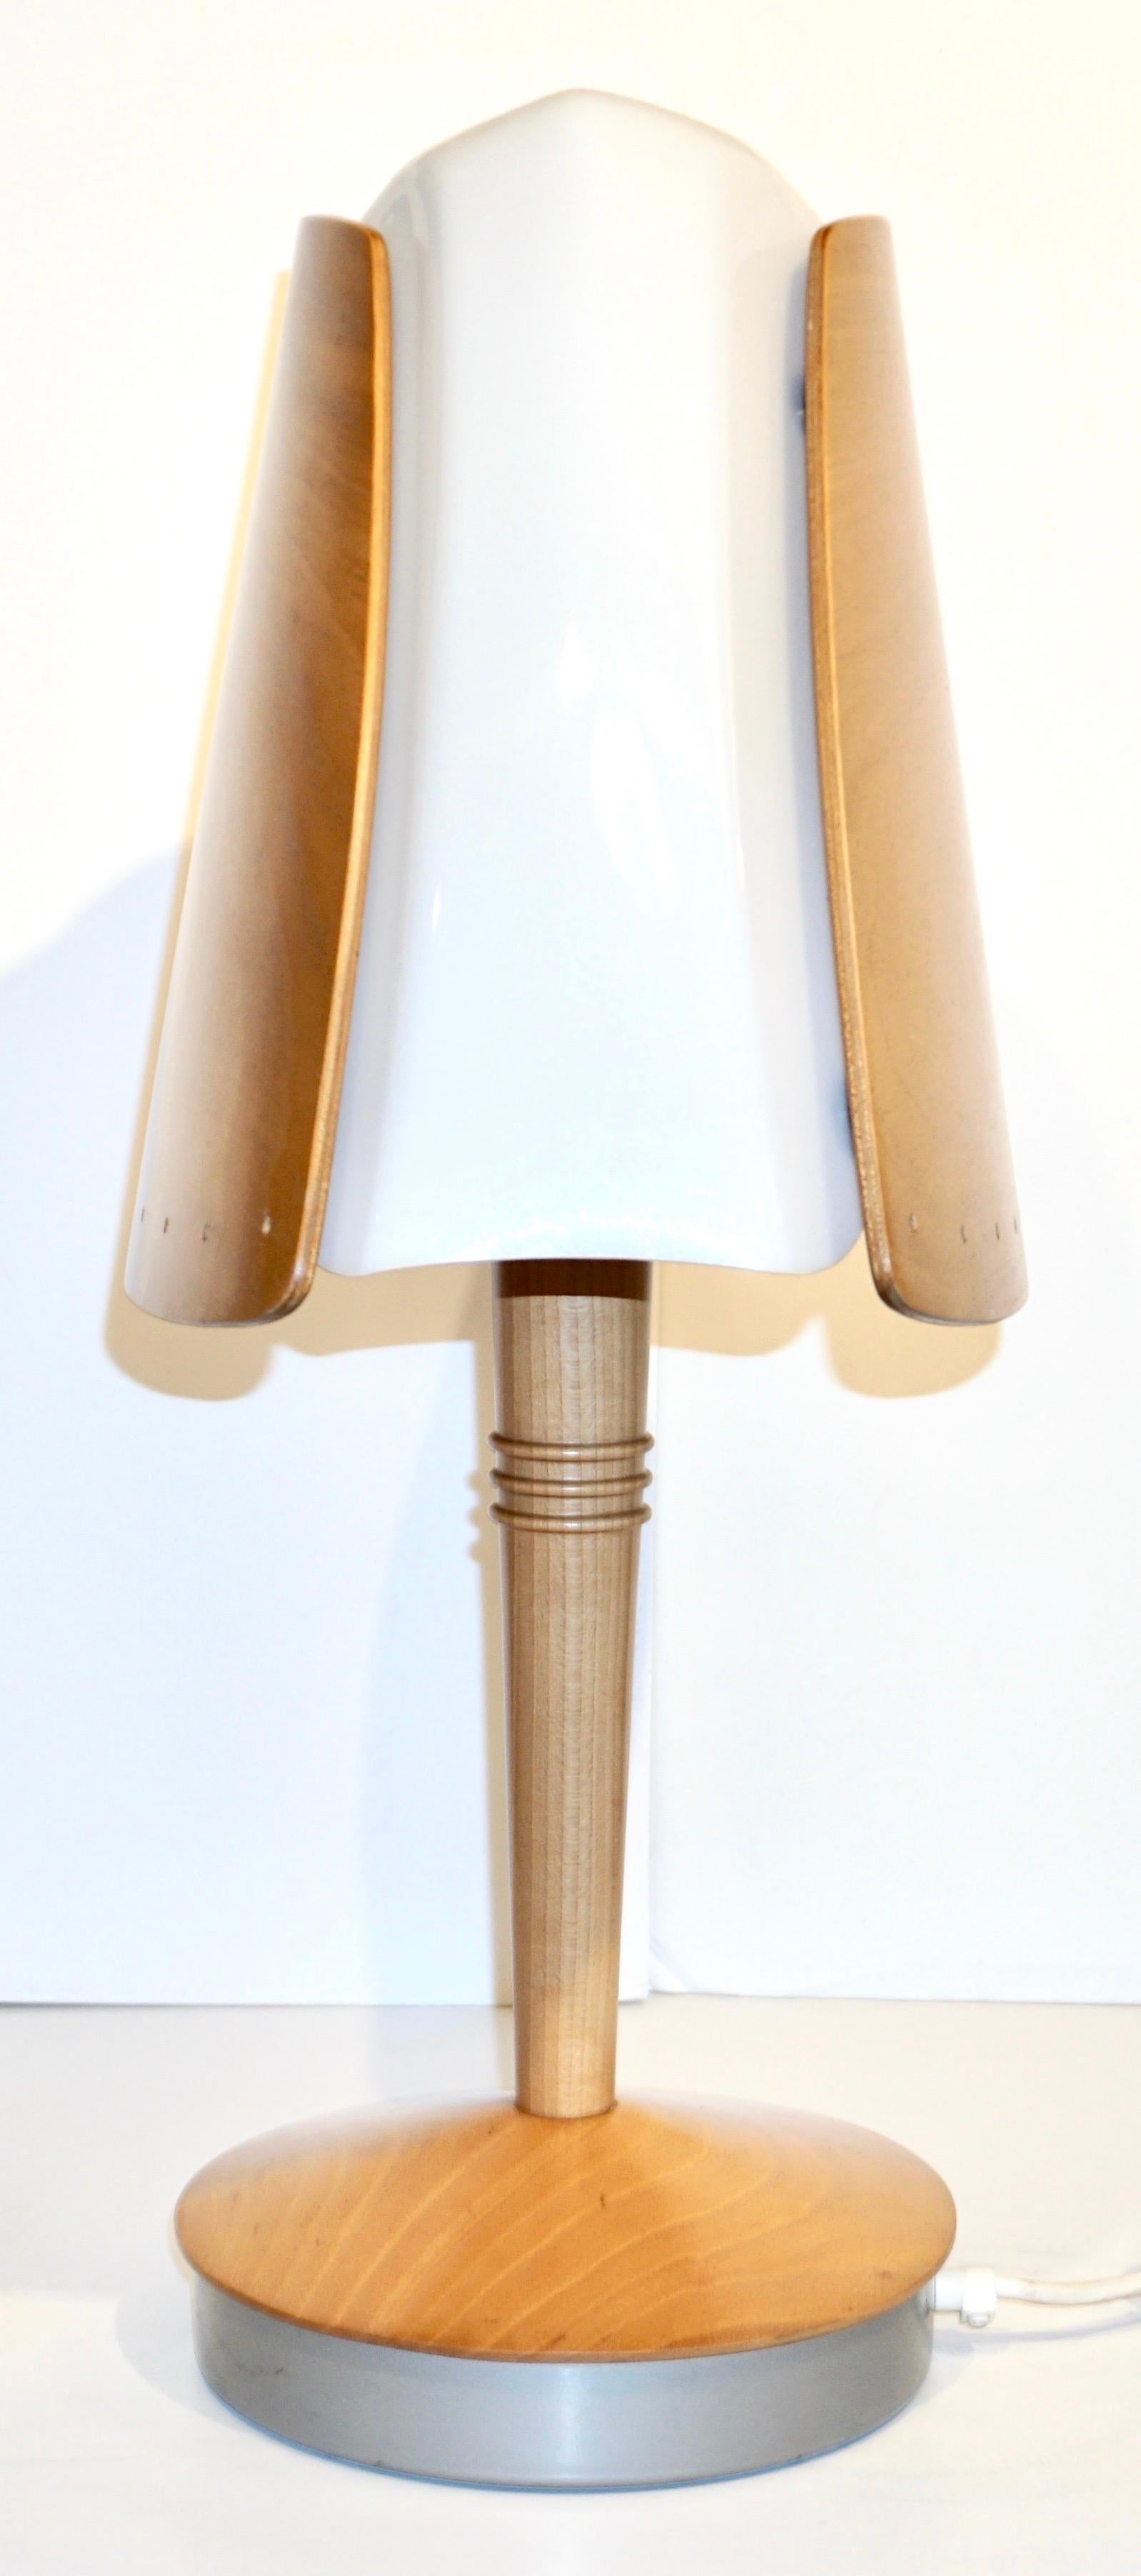 1970 French Vintage Birch Wood and Acrylic Table Lamp for Barcelona Hilton Hotel For Sale 7